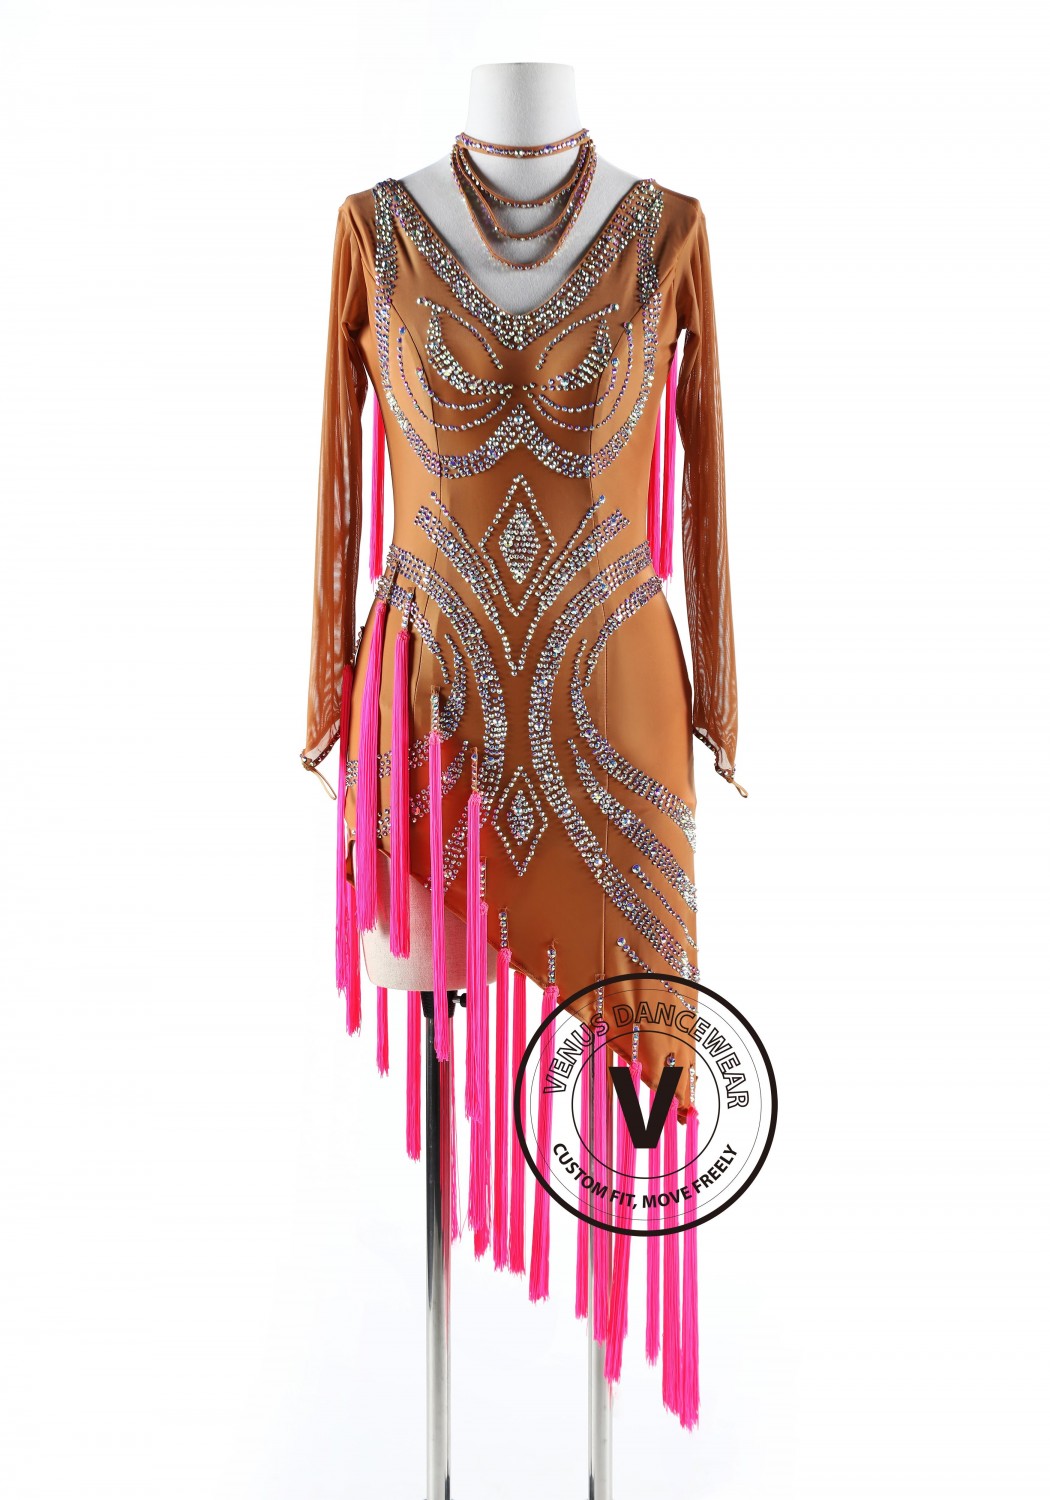 Tan and Pink Tassels Latin Rhythm Competition Dance Dress